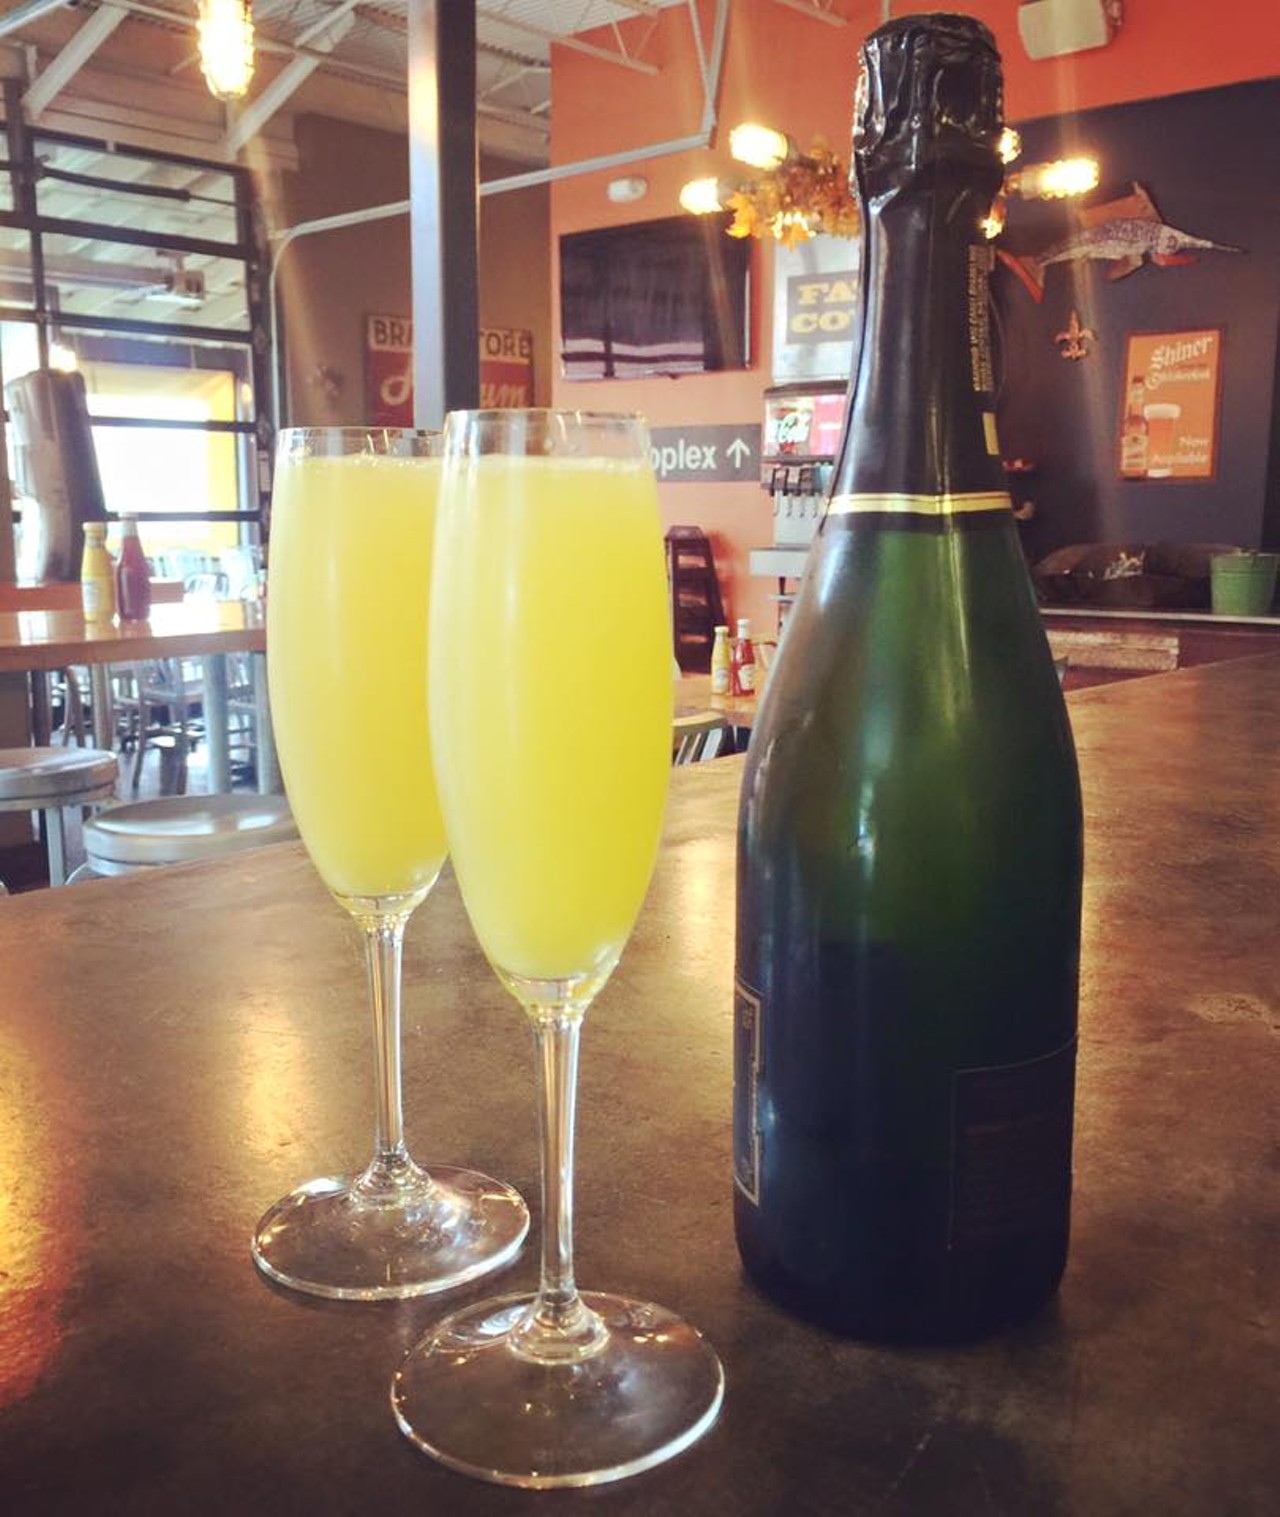 https://media2.metrotimes.com/metrotimes/imager/14-places-to-dine-in-detroit-if-you-love-bottomless-mimosas/u/zoom/29104799/bottomless-mimosa.jpg?cb=1647989266